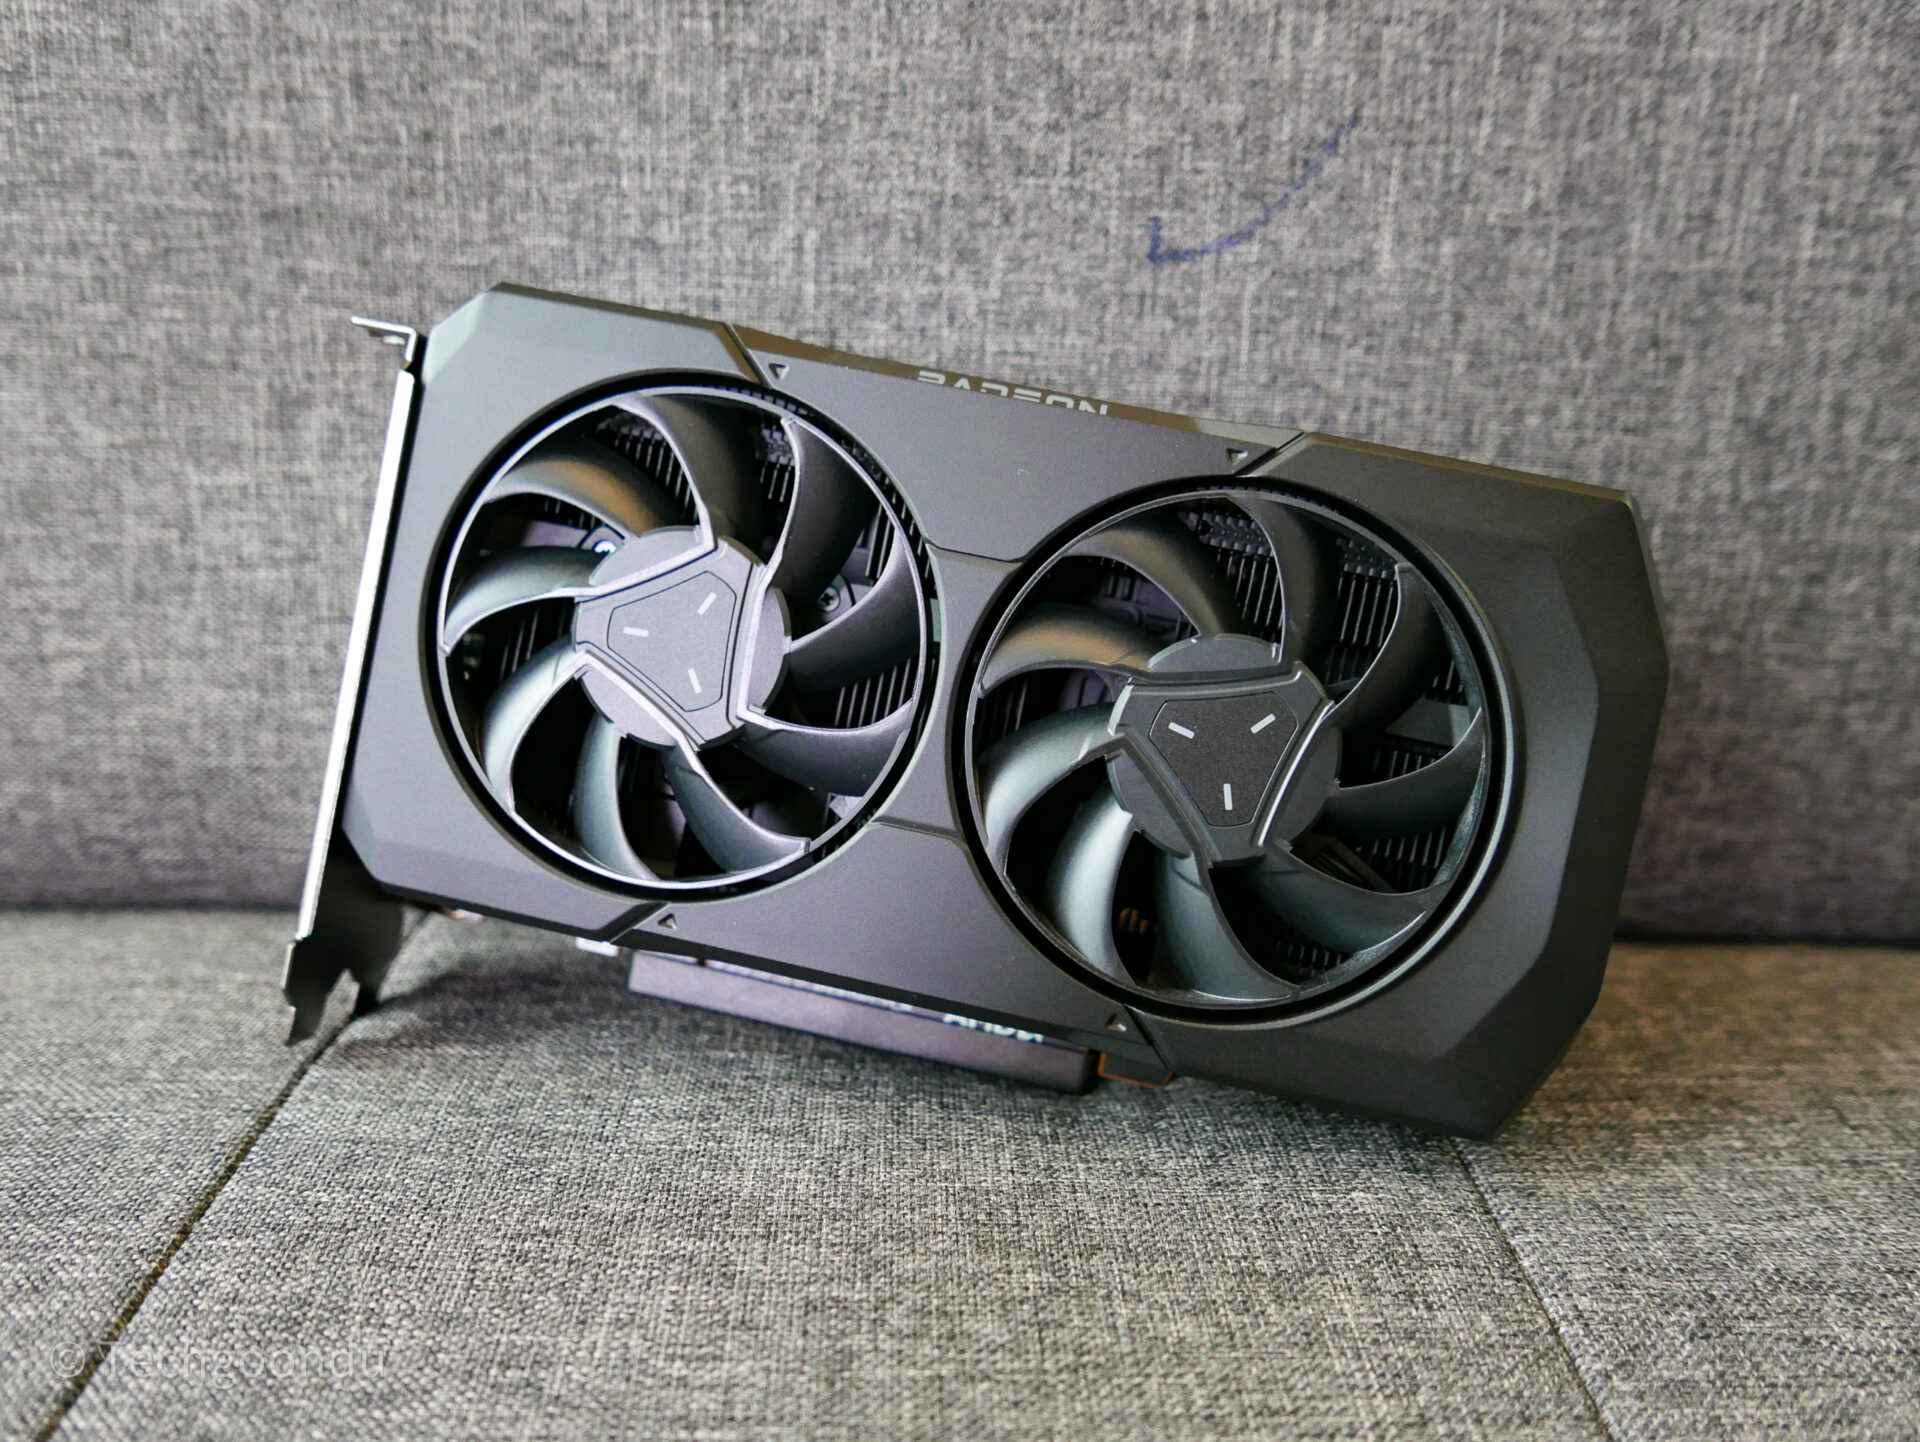 AMD Radeon RX 7600 review: Decent gaming graphics on a tight